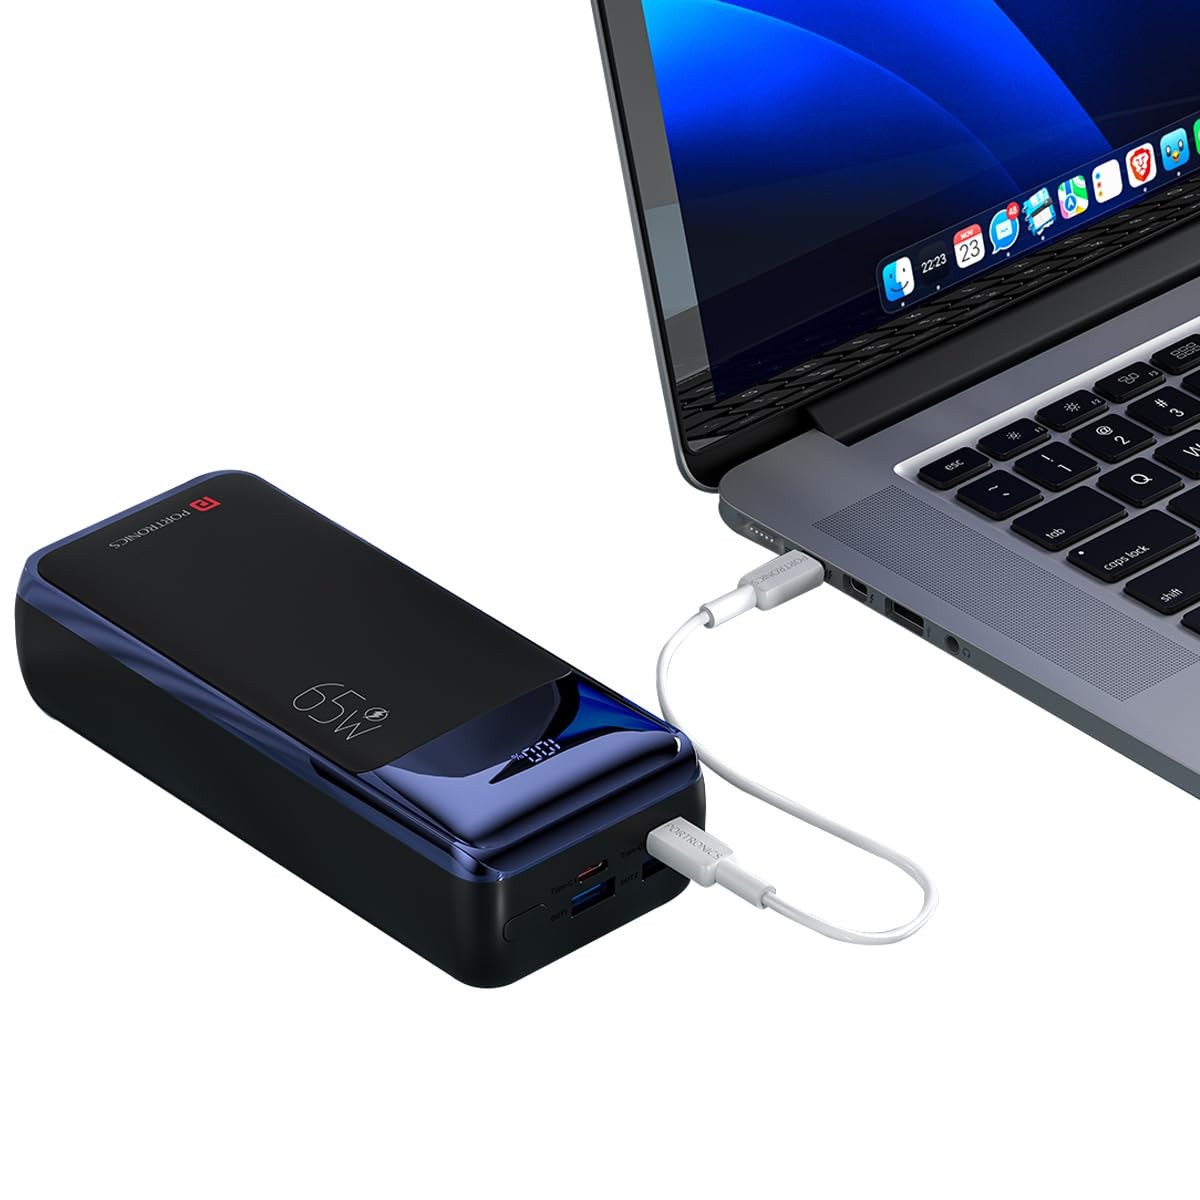 Portronics Ampbox 27K 65W 27000 mAh 4-in-1 Fast Charging Power Bank with 2 Type C PD Output Ports  2 Mach USB Output Ports Compatible with Laptop